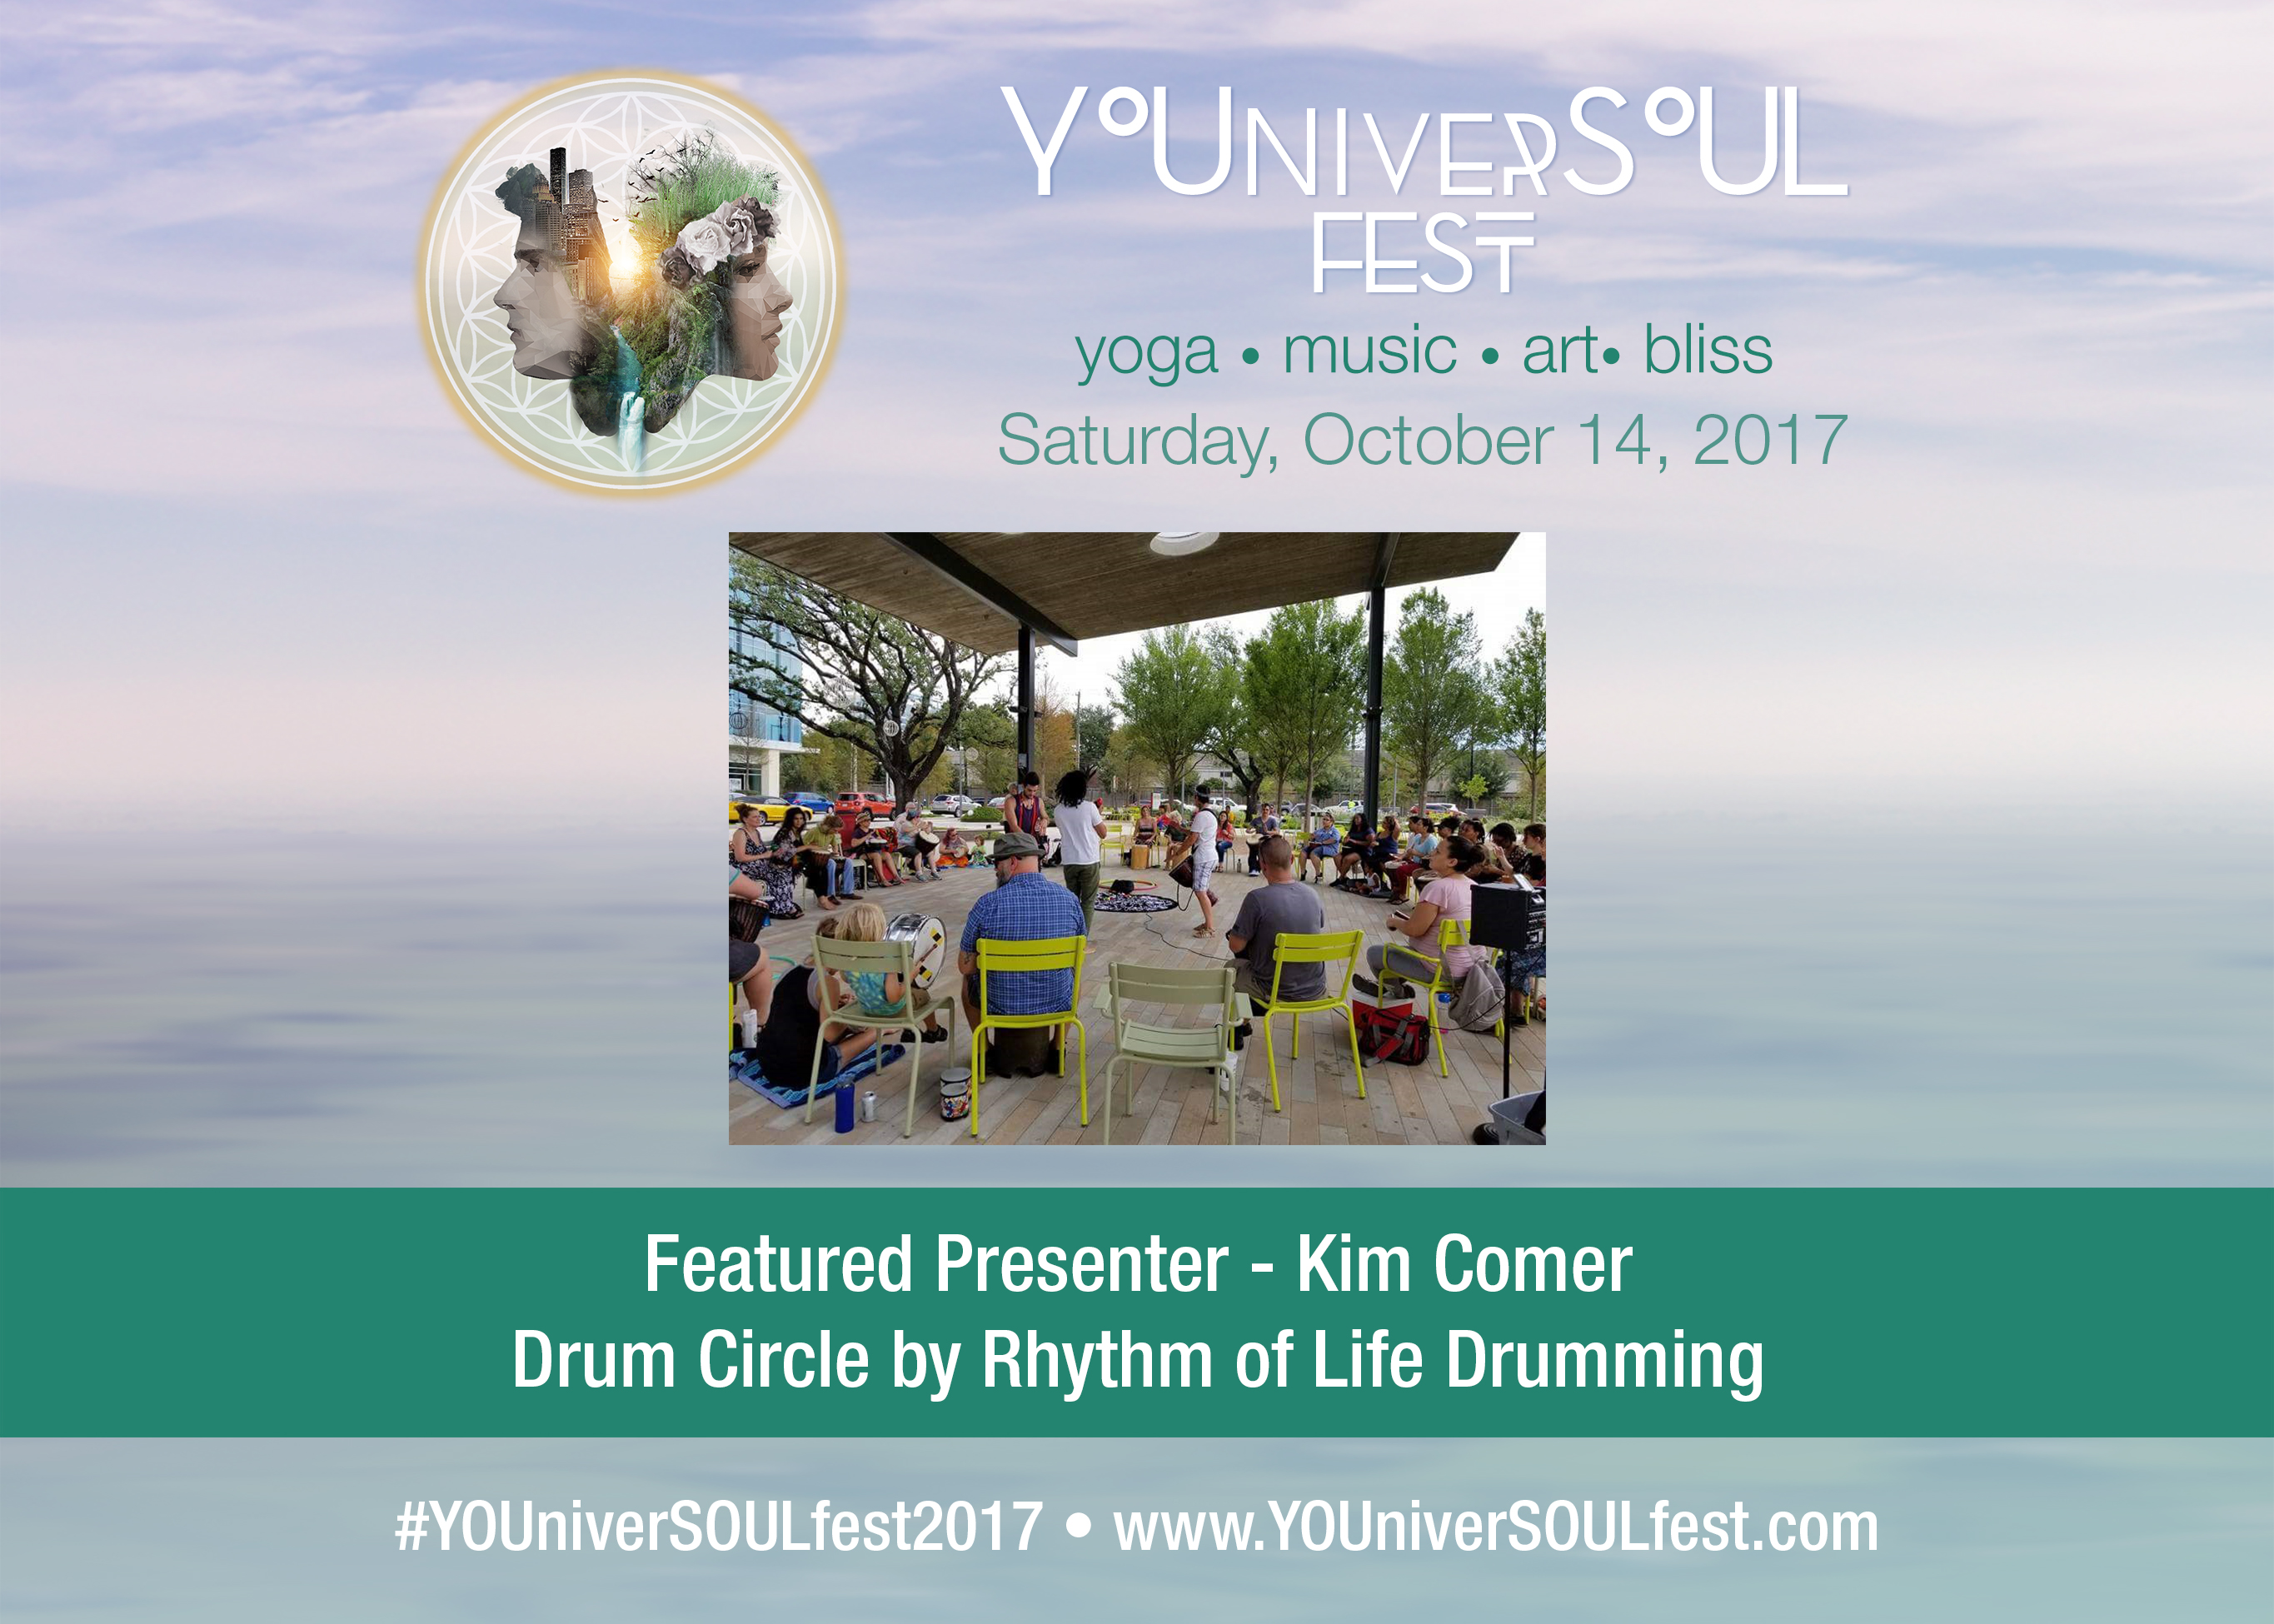 Drum Circle by Rhythm of Life Drumming featuring Kim Comer